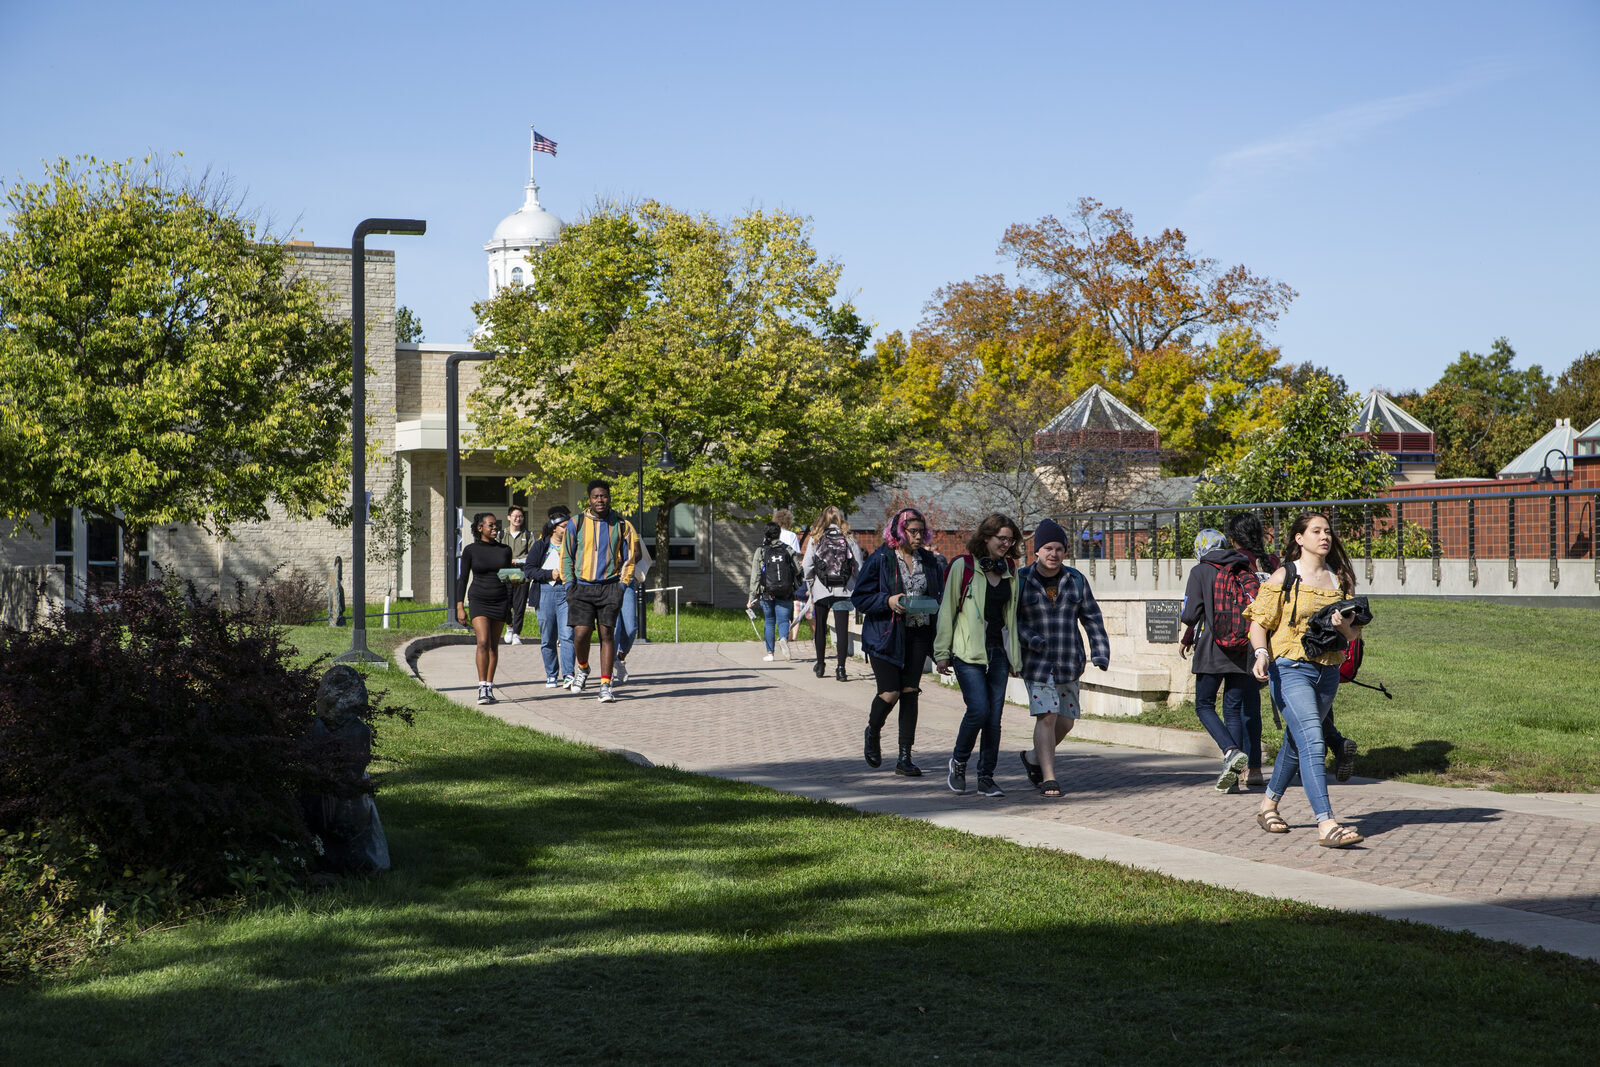 Lawrence students walking on a paved path with an academic hall in the background. Students are in small groups smiling and talking.